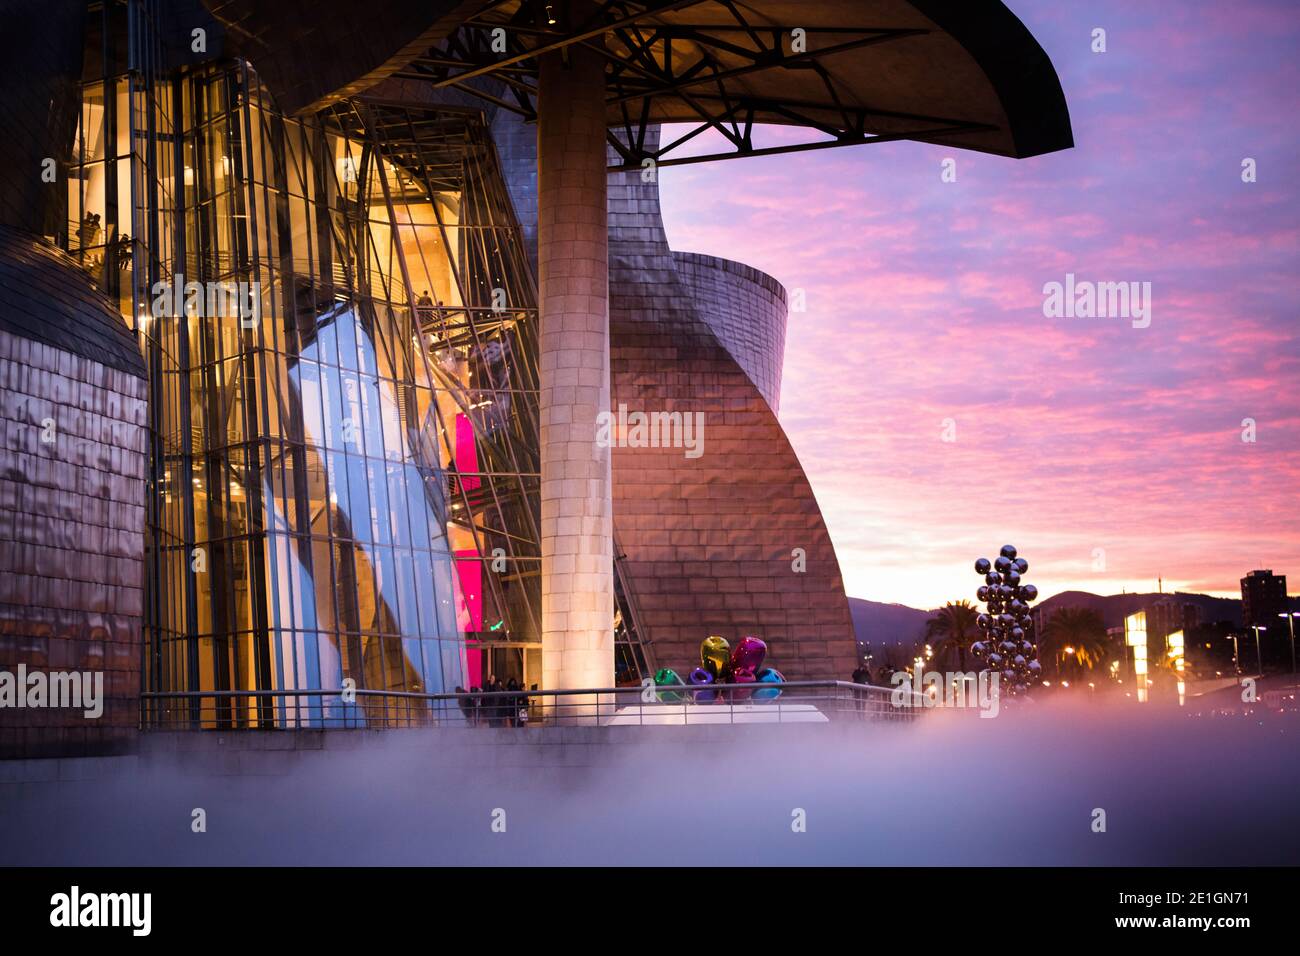 Exterior view of the curved titanium and glass facade of The Guggenheim Museum in Bilbao, Basque Country, Spain at sunset. Stock Photo